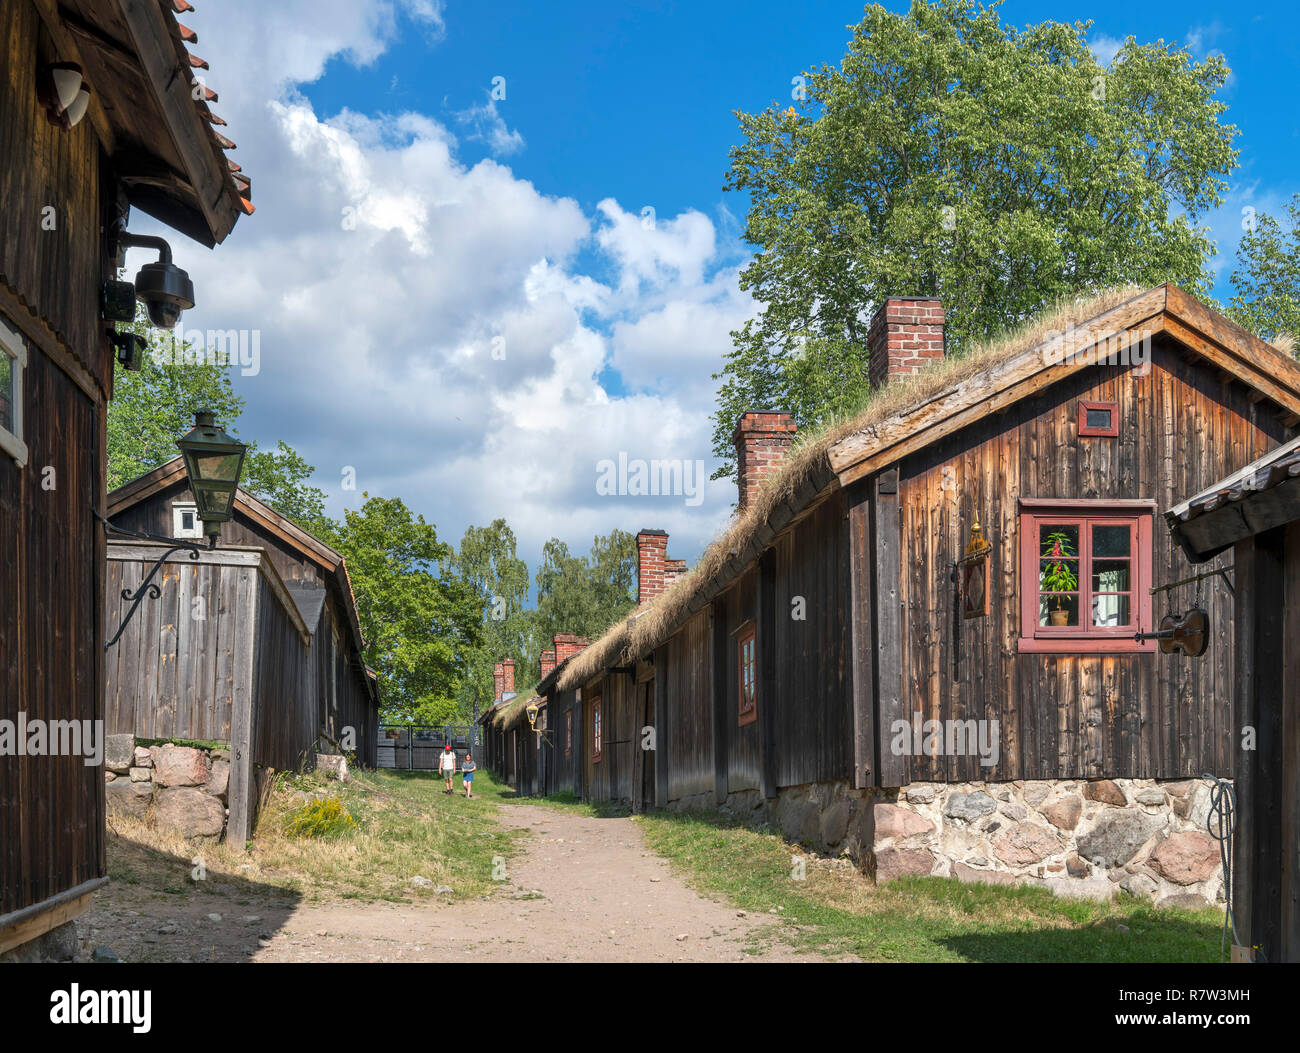 Tourists at the Luostarinmäki Handicrafts Museum, an area of 200 year old wooden buildings which survived the fire of 1827, Turku, Finland Stock Photo